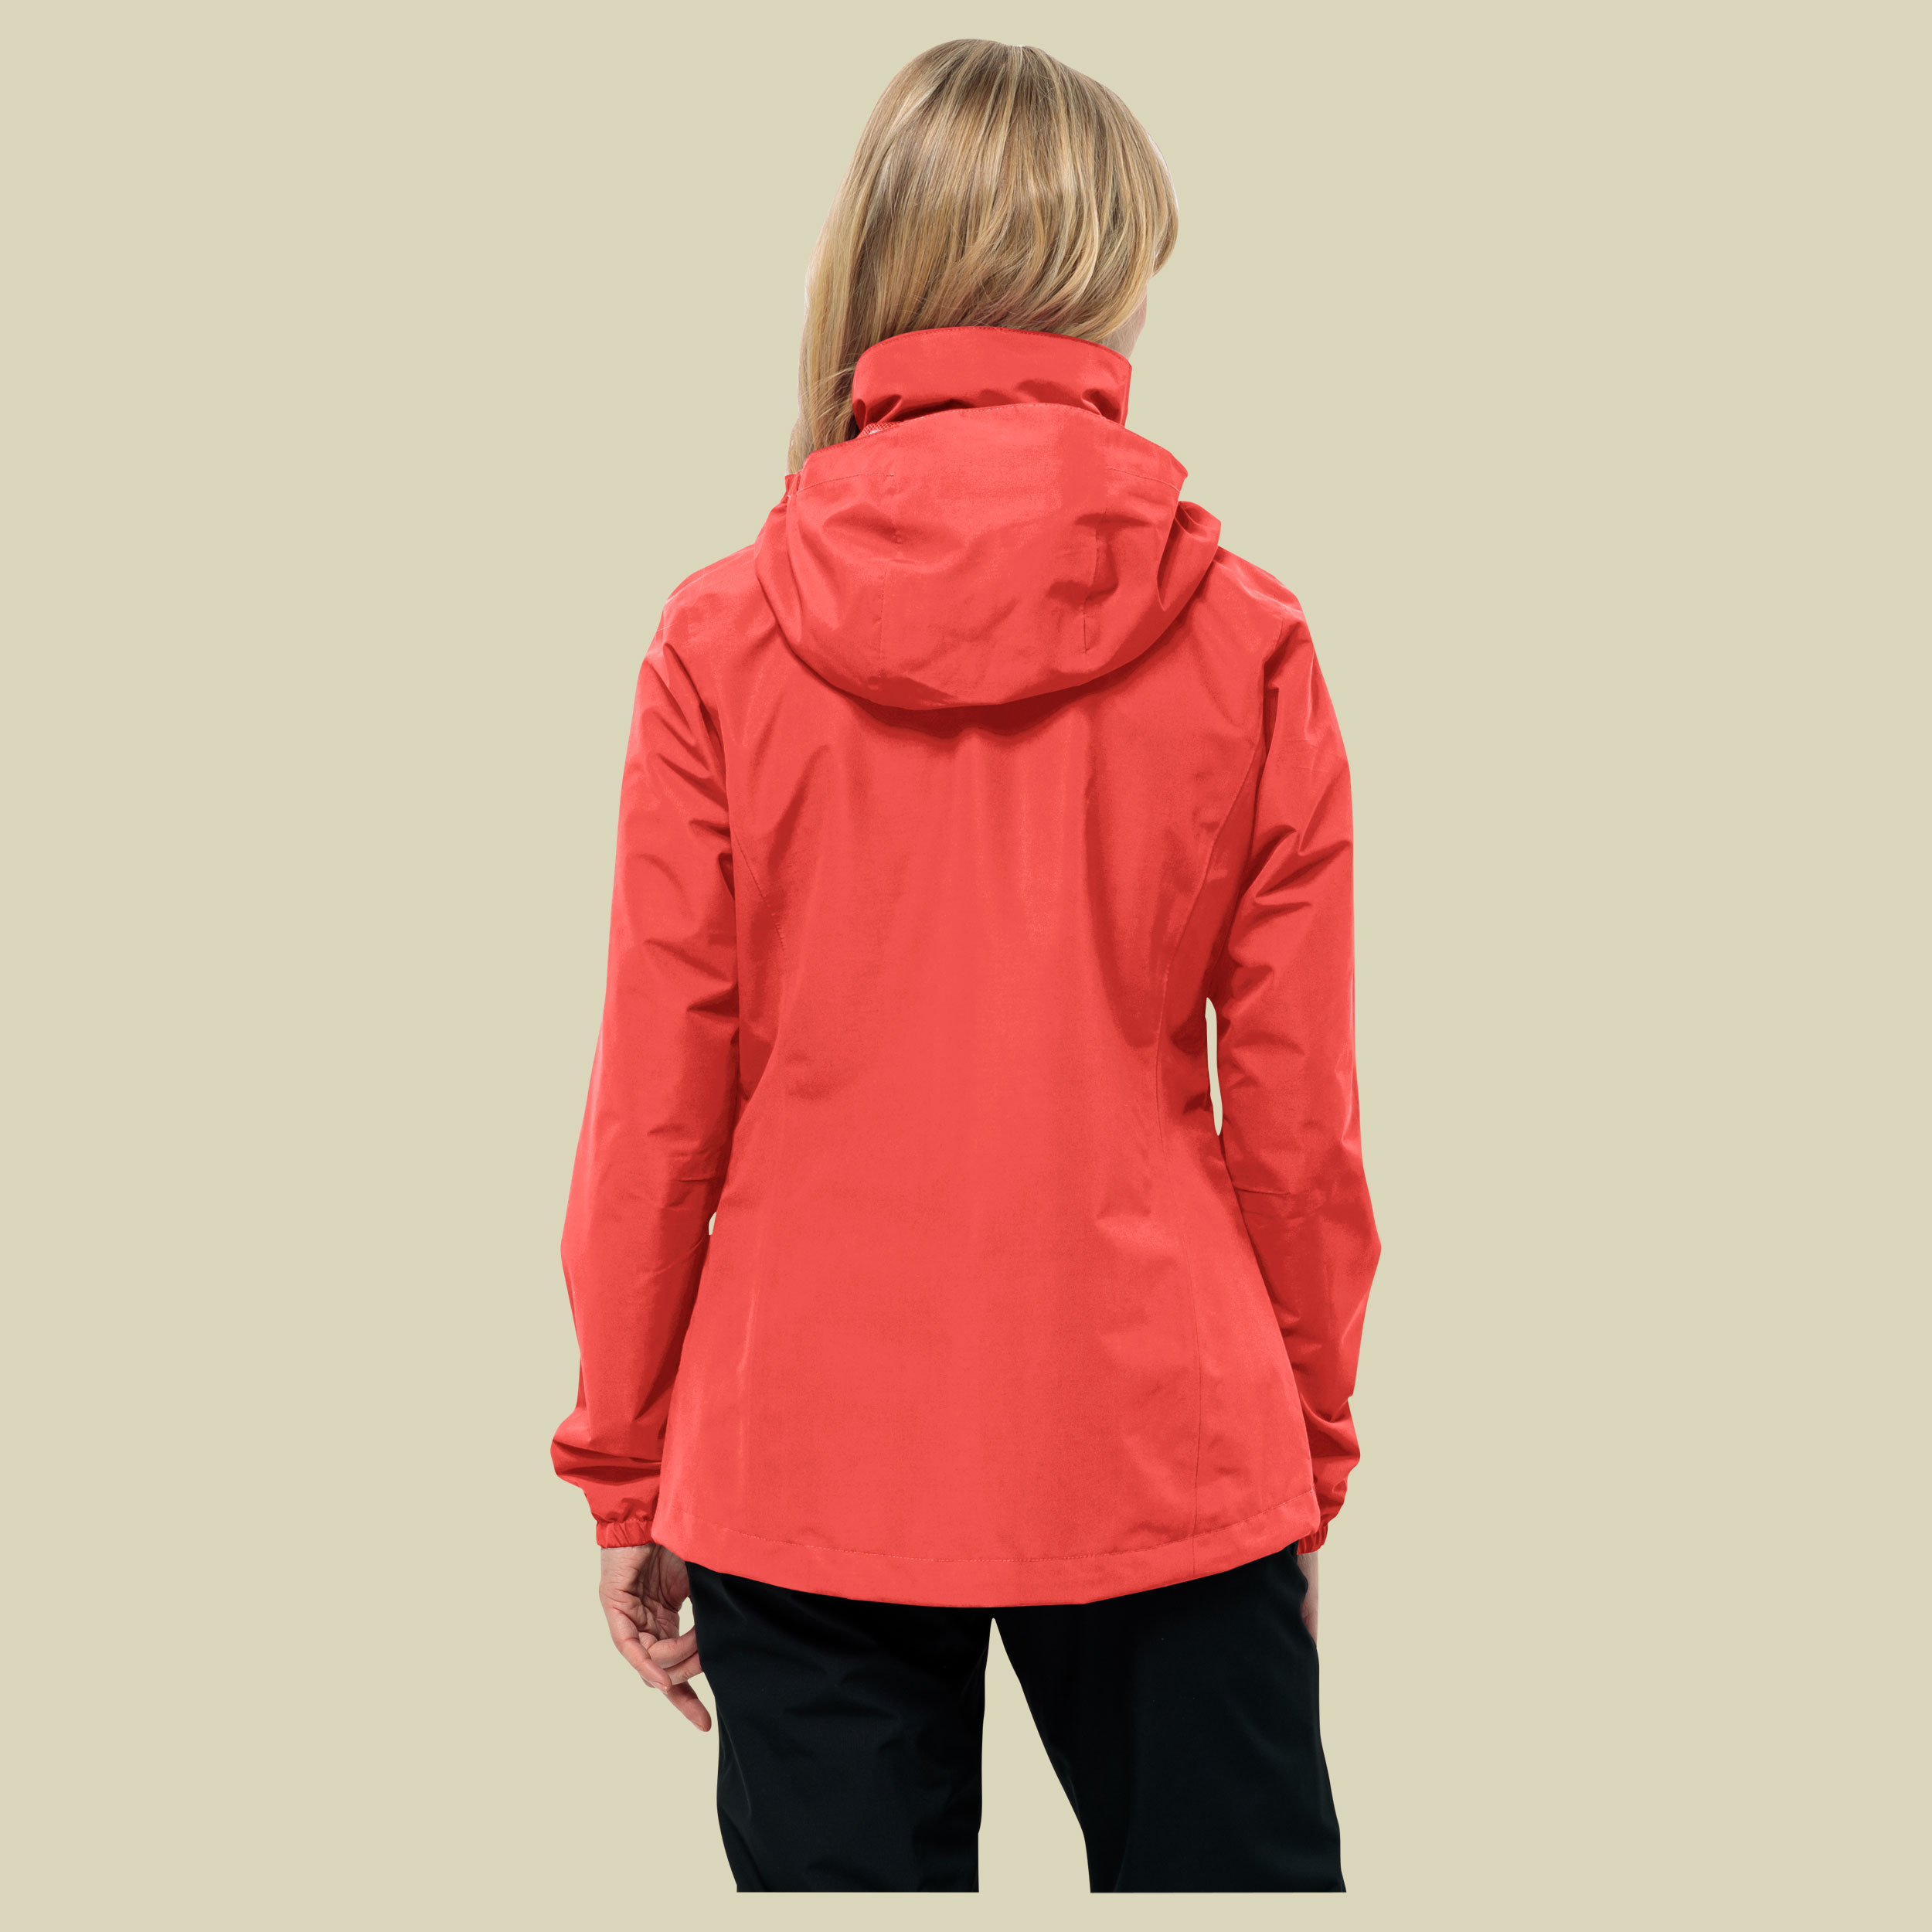 Stormy Point 2L Jacket Women rot XXL - vibrant red